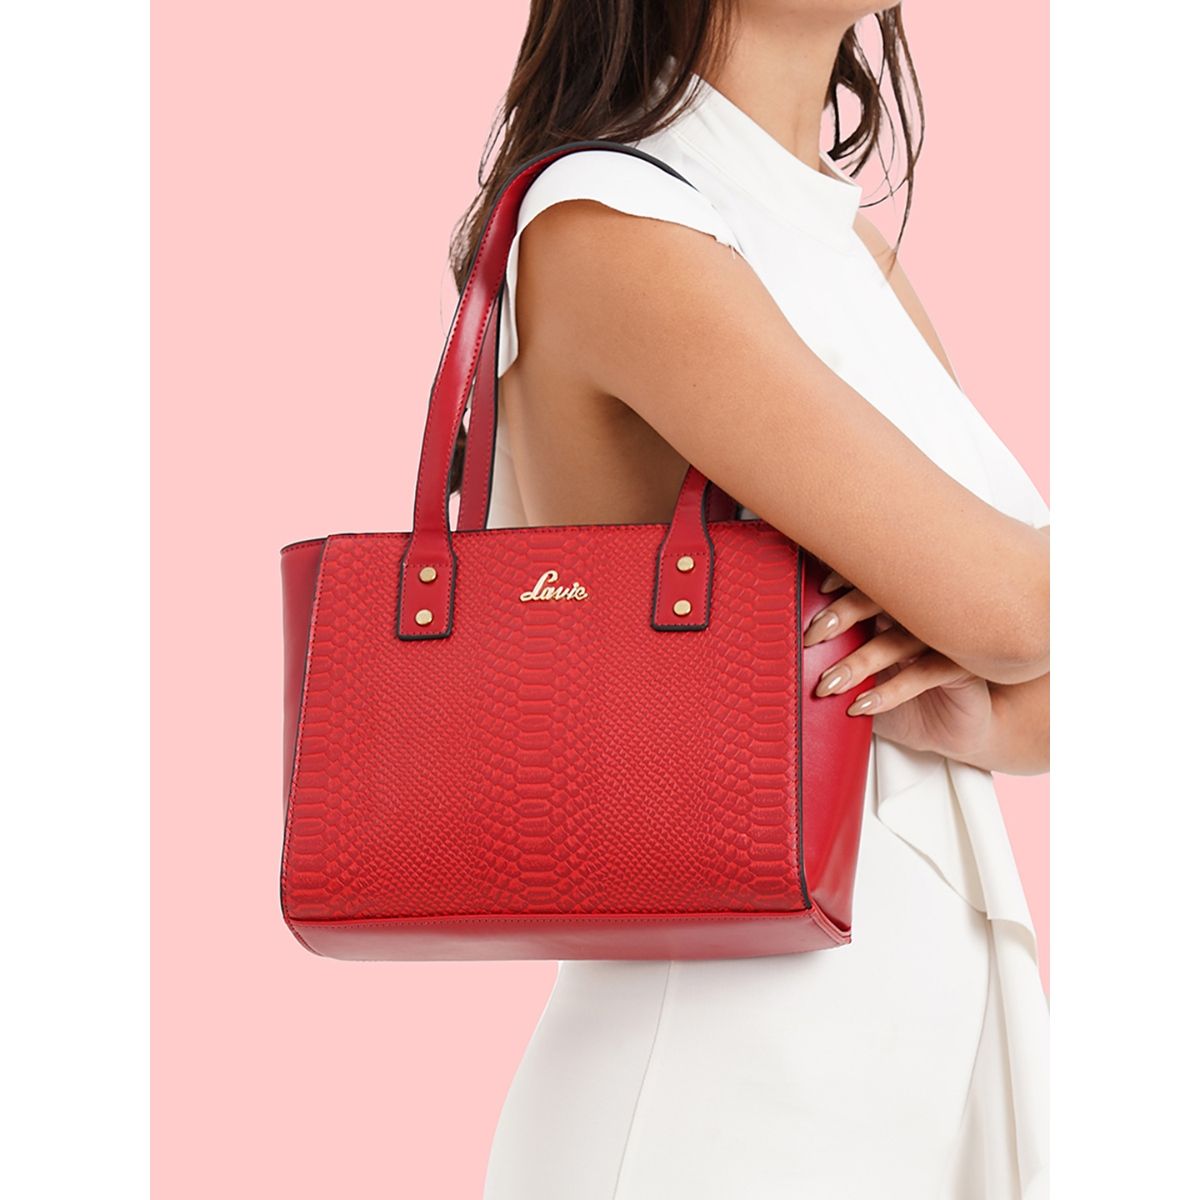 Best Lavie Handbags To Style Yourself With Swag And Elegance